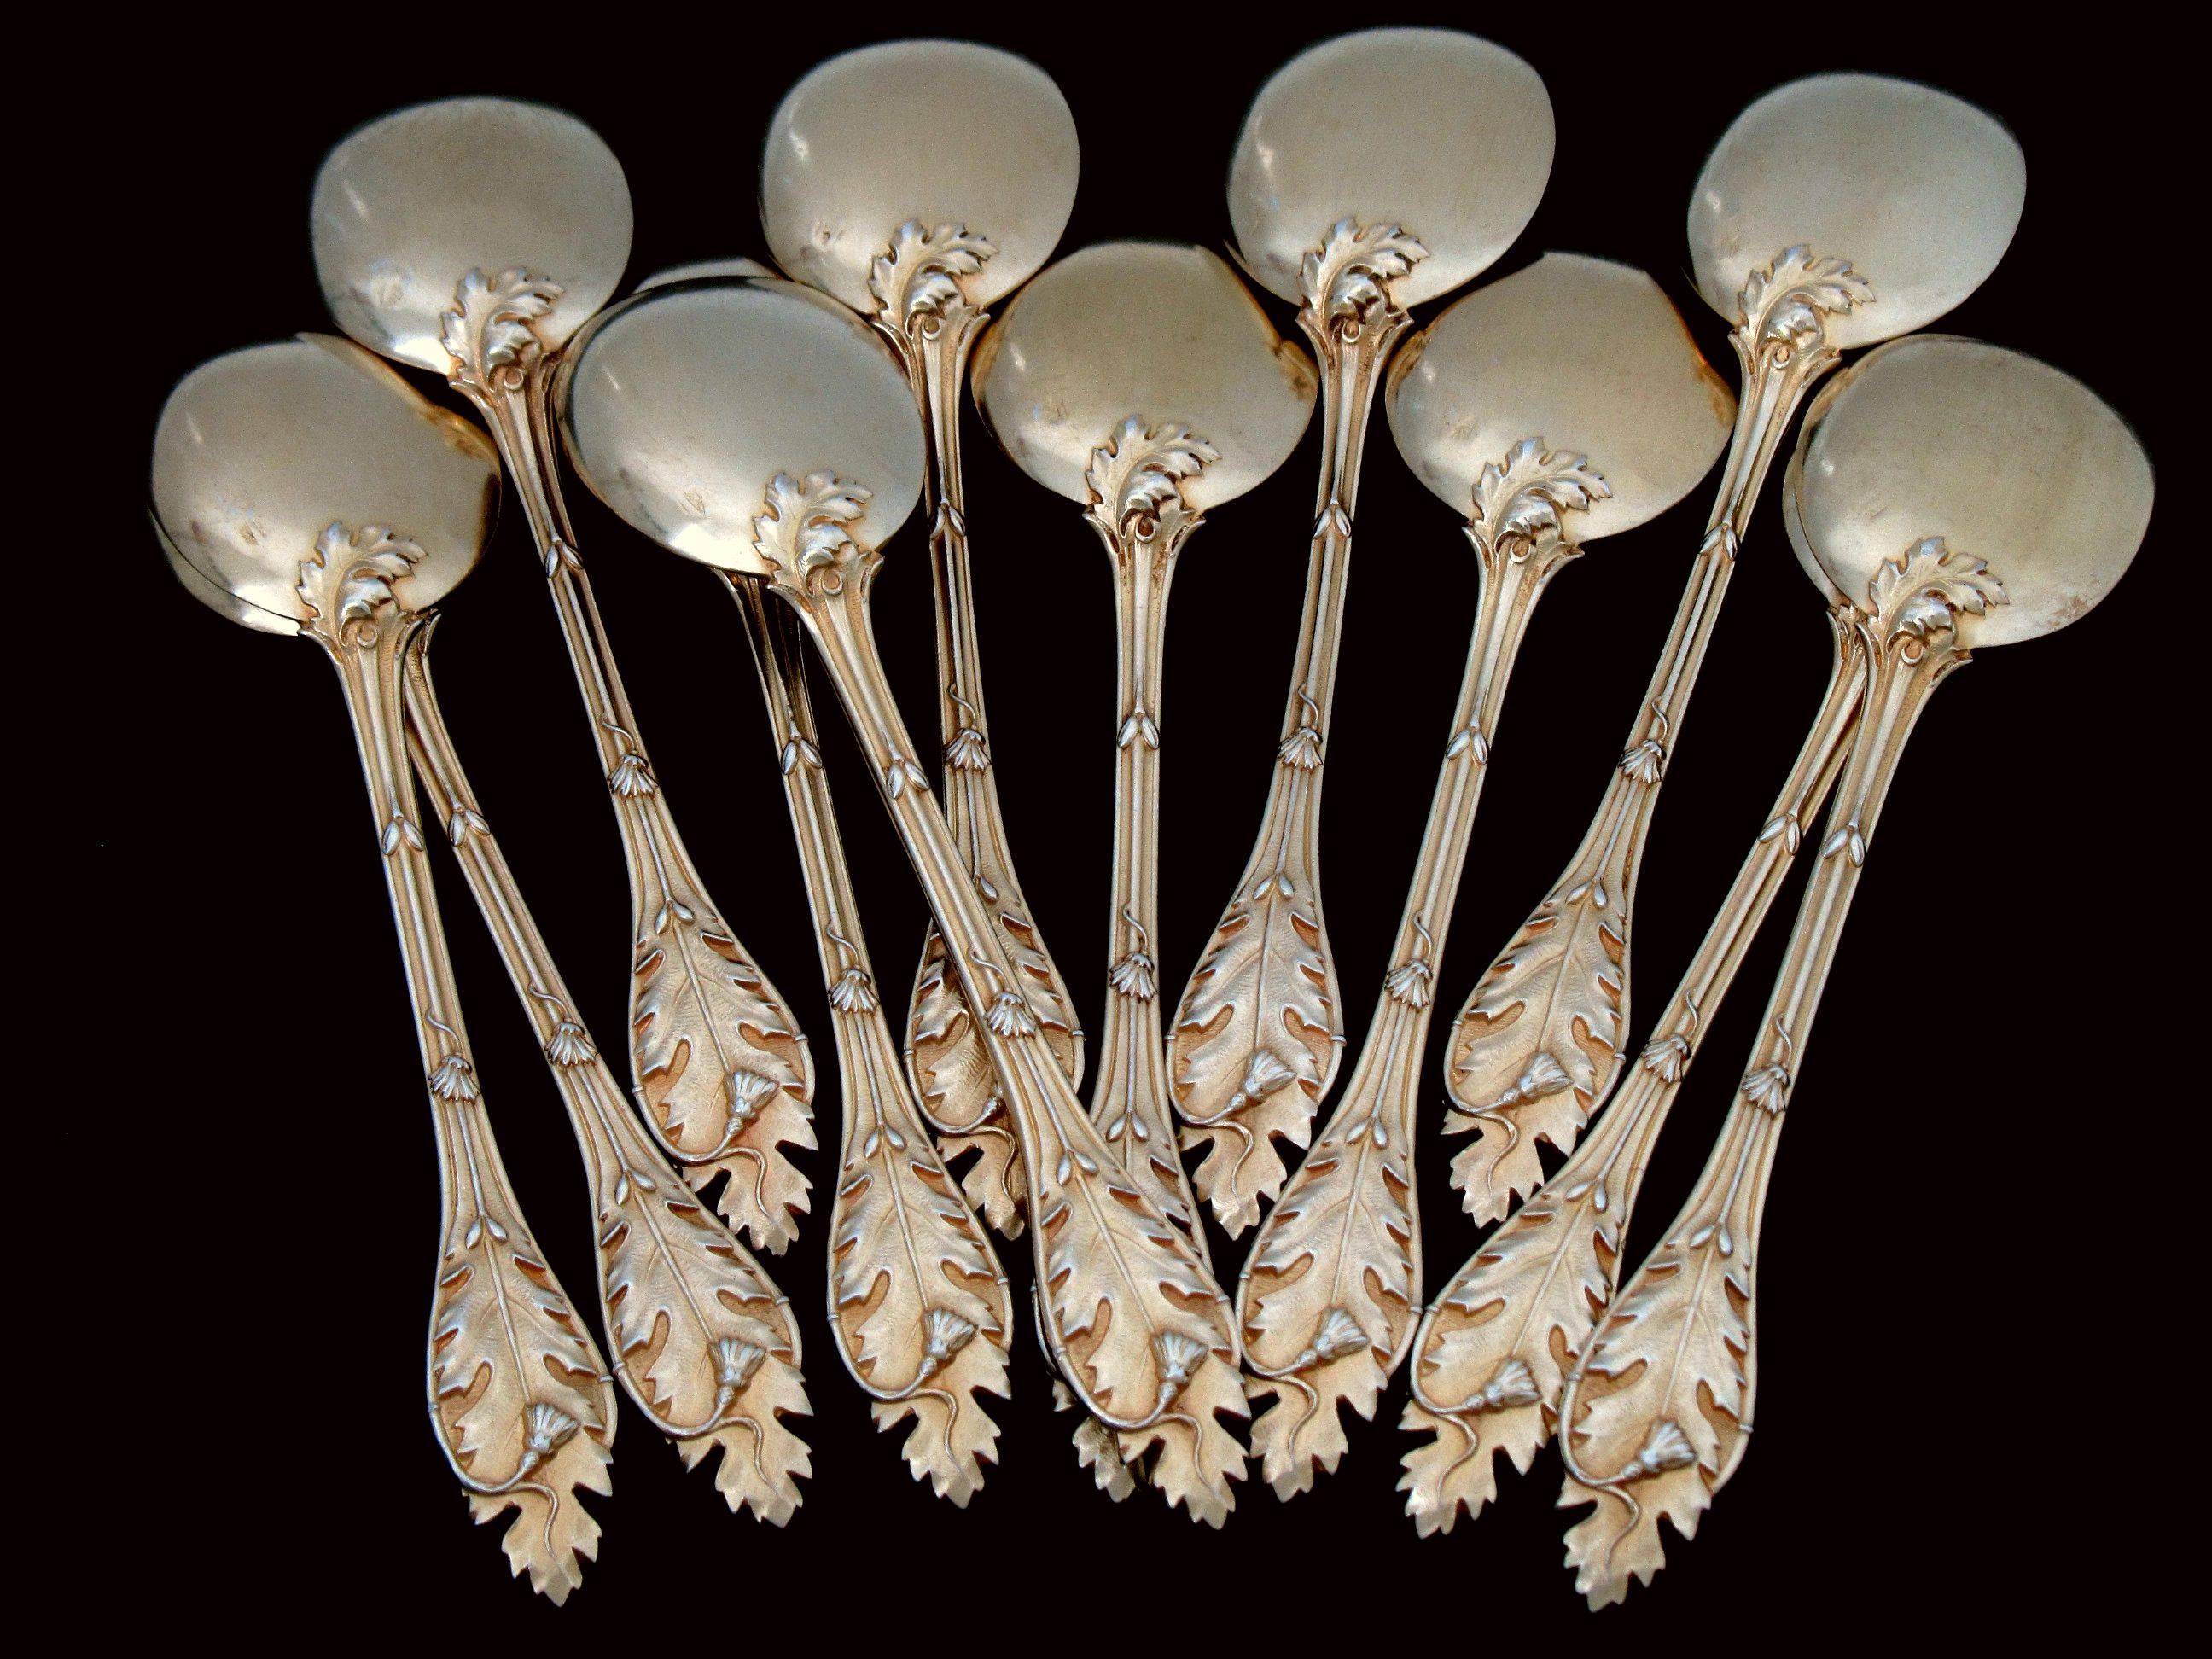 Linzeler Masterpiece French Sterling Silver Vermeil Ice Cream Spoons Set 12 pc For Sale 5